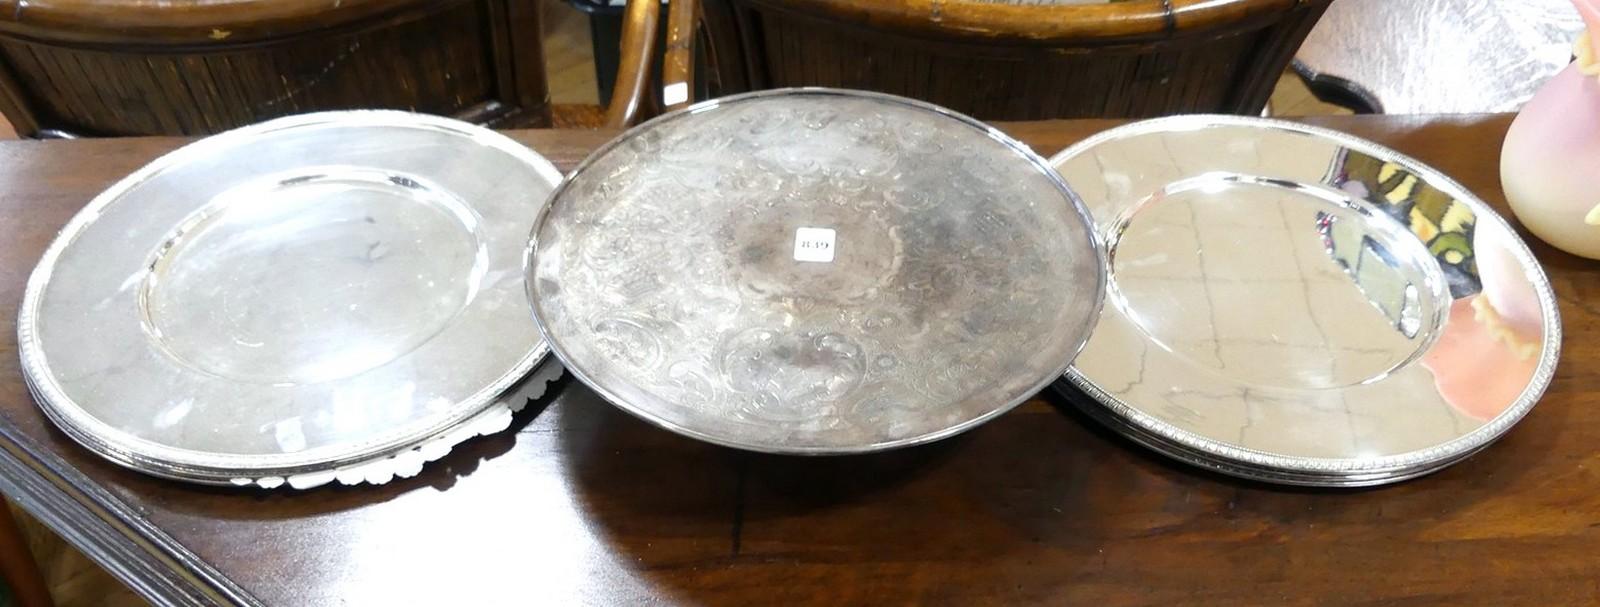 SILVERPLATE CAKE STAND AND PLATES